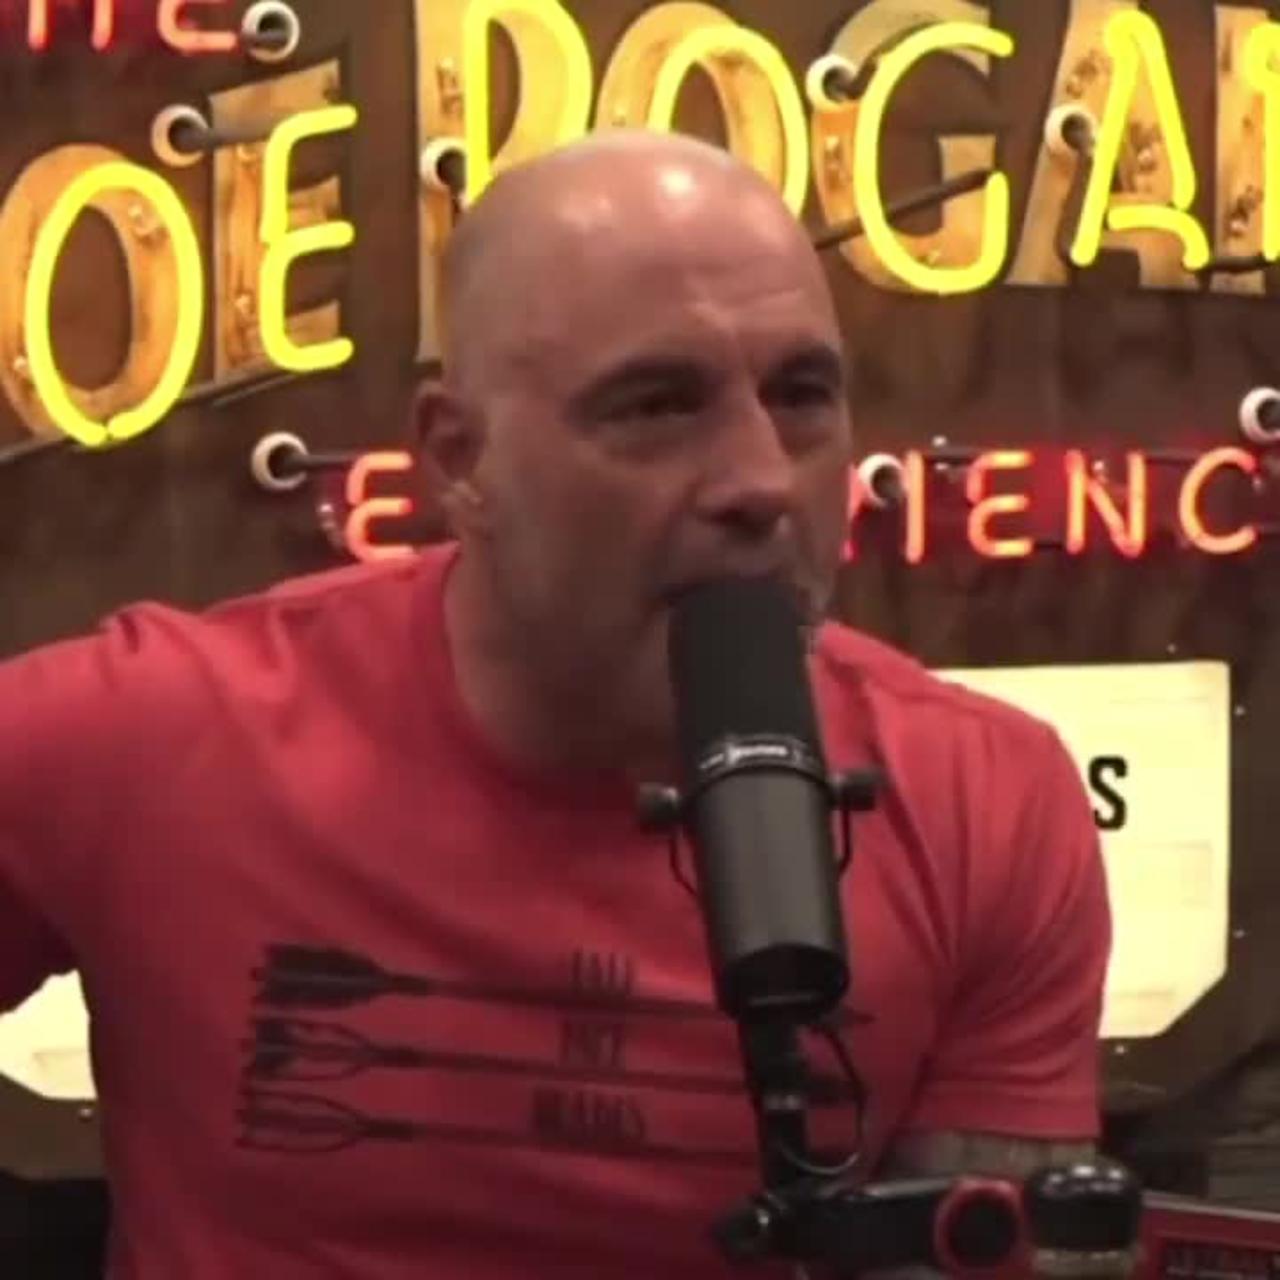 Joe Rogan has Some Words About the Brittney Griner Situation